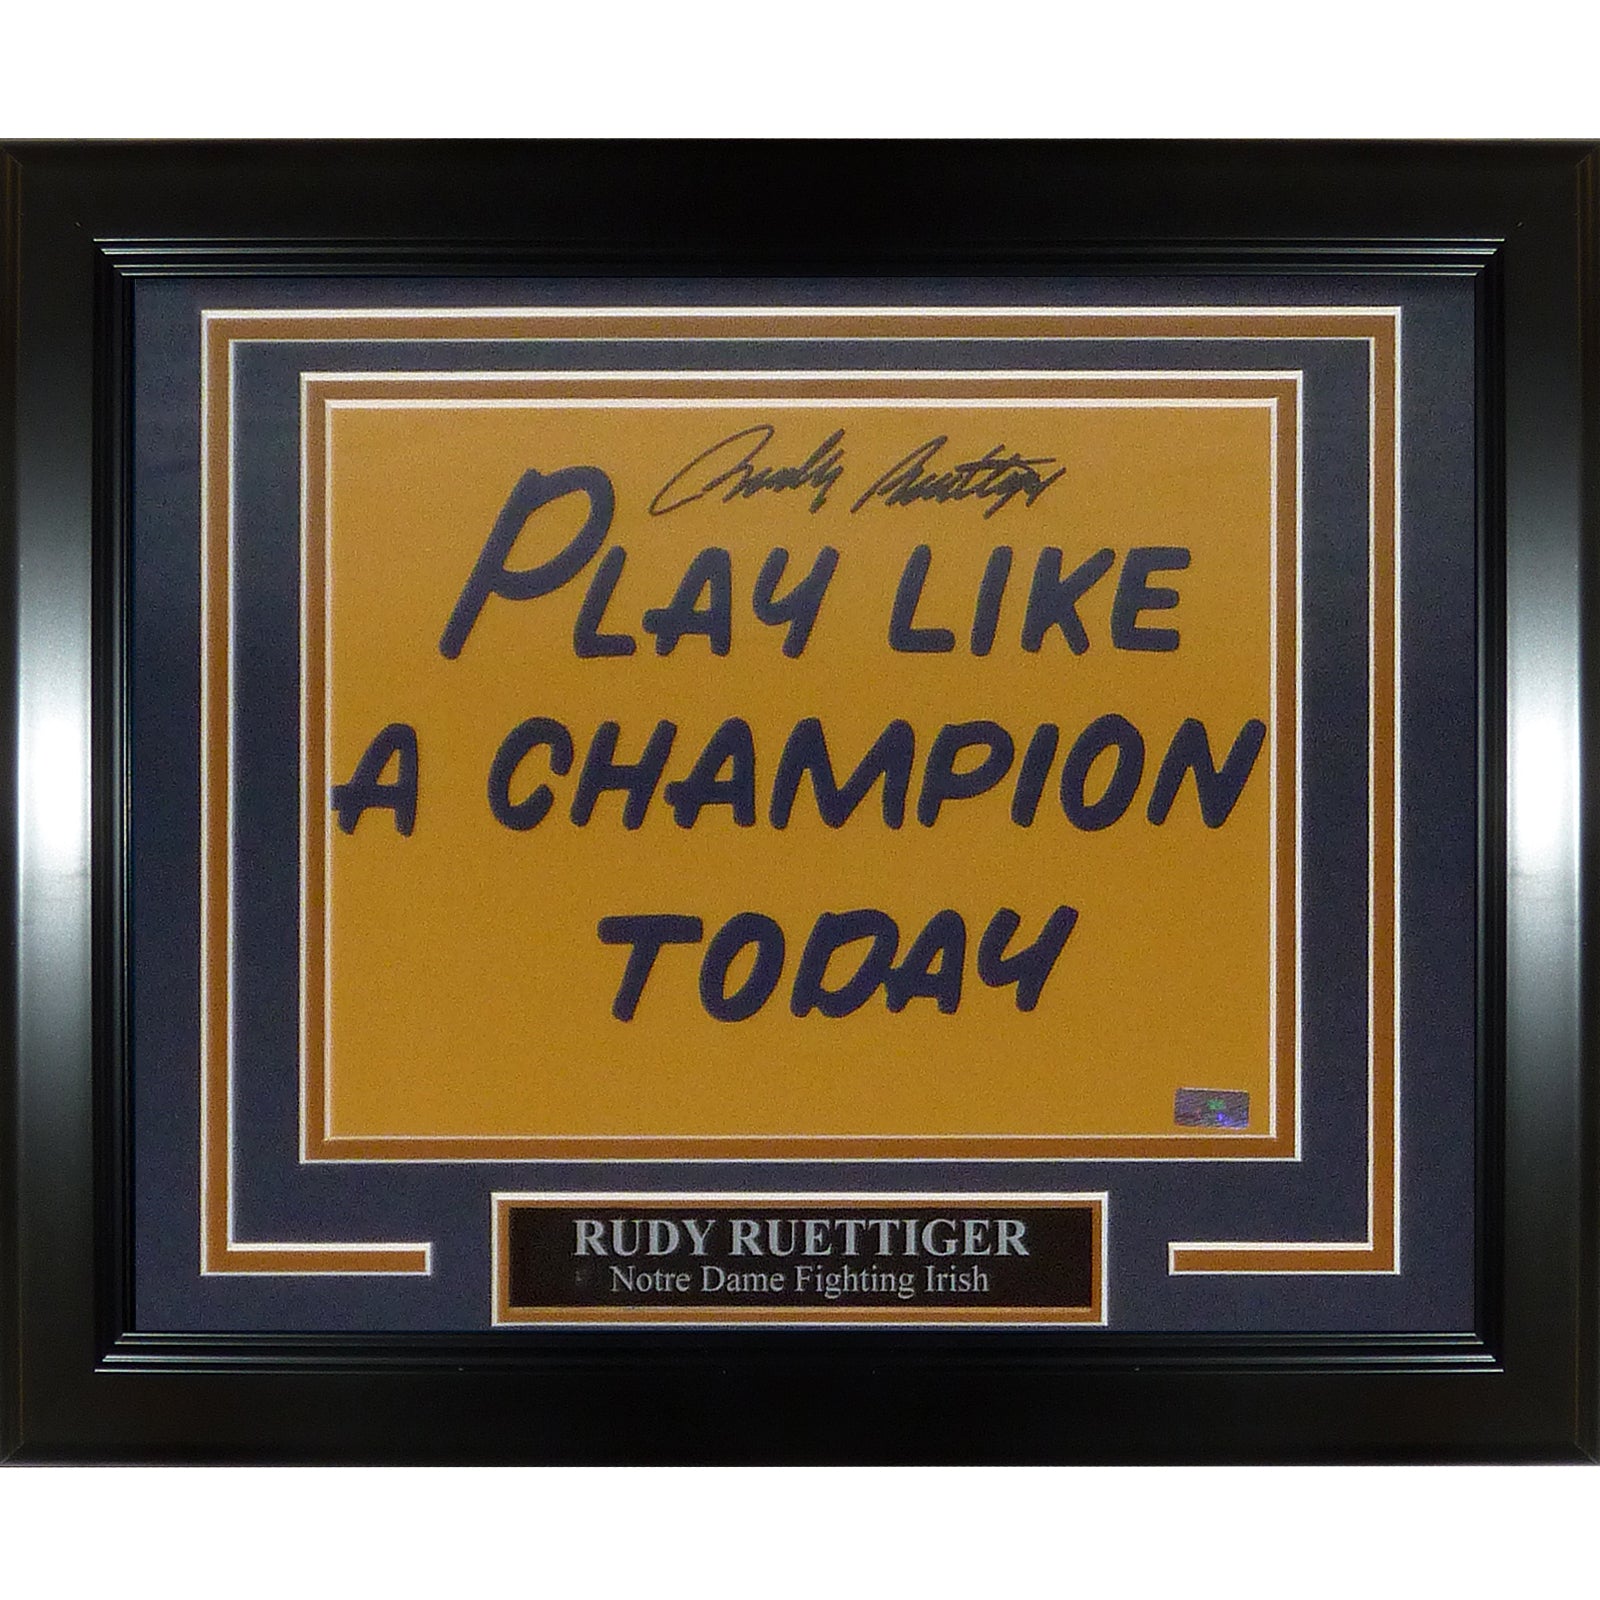 Rudy Ruettiger Autographed Notre Dame Play Like A Champion Today Framed 8x10 Photo